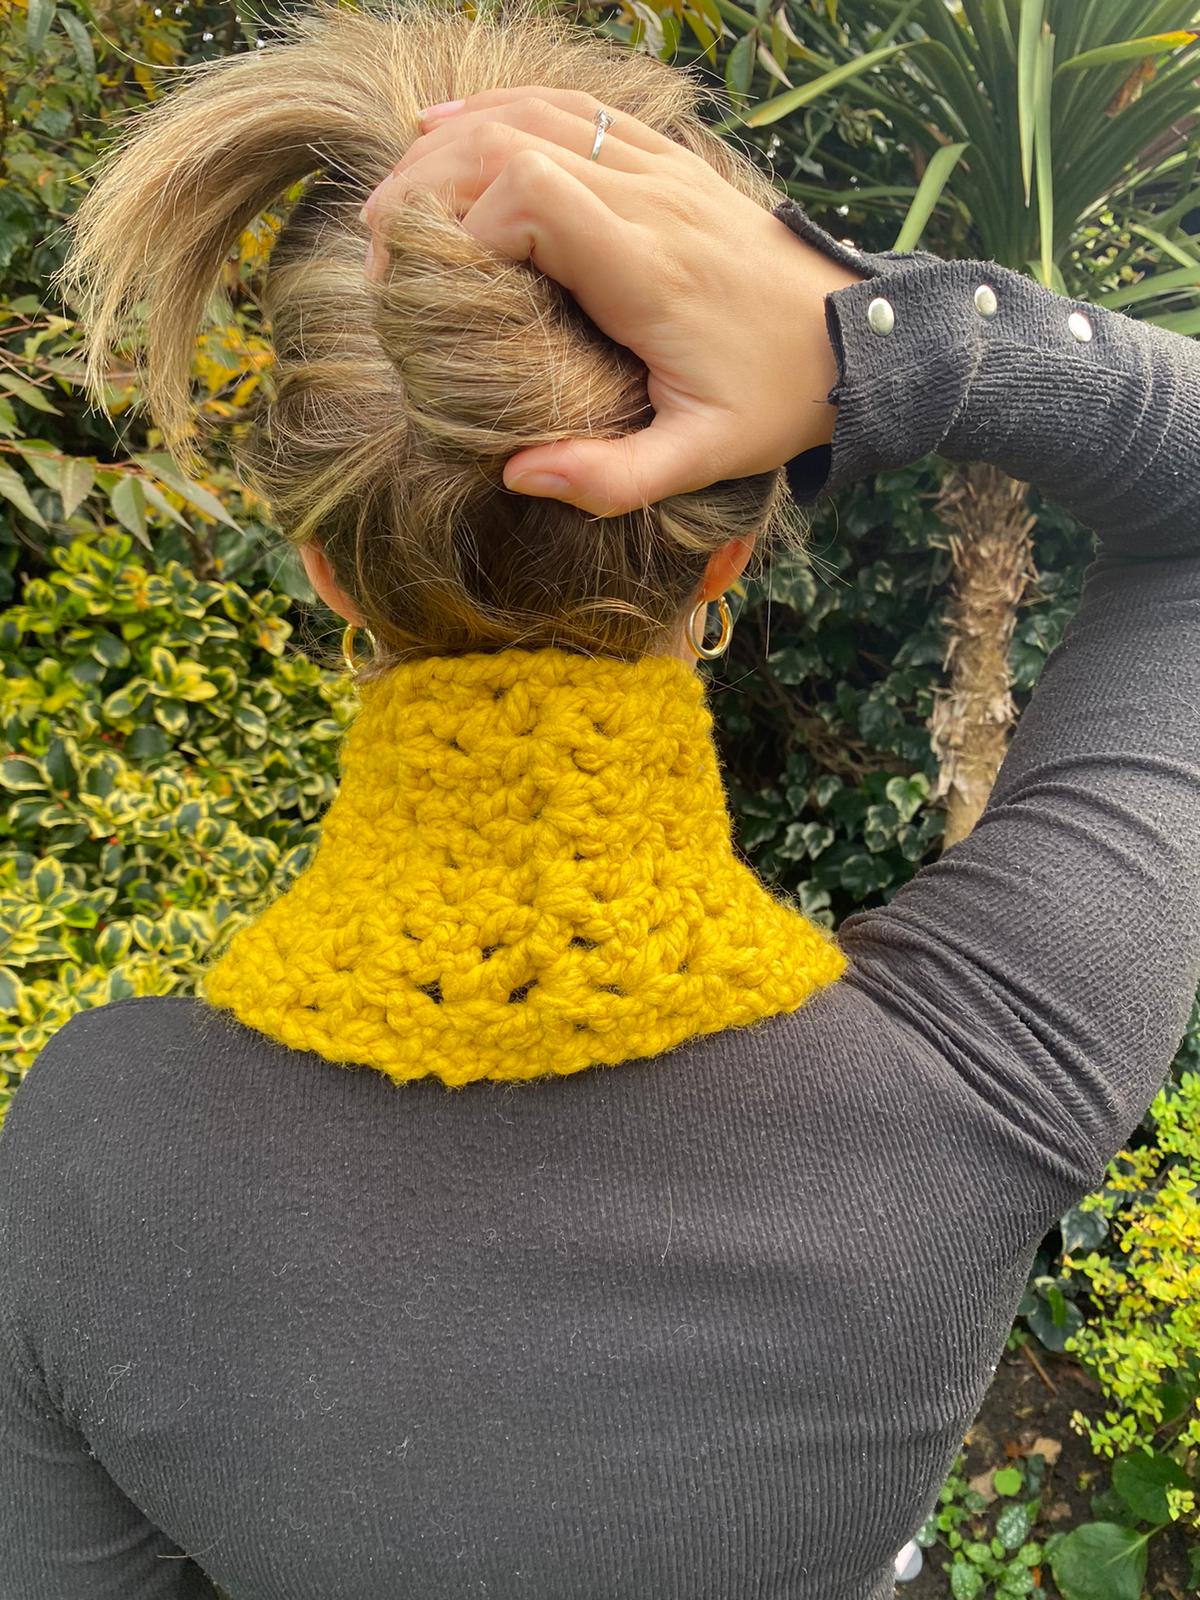 Stunning short extra chunky scarf in mustard with brown 'sharkstooth' toggle. Handmade and unique.